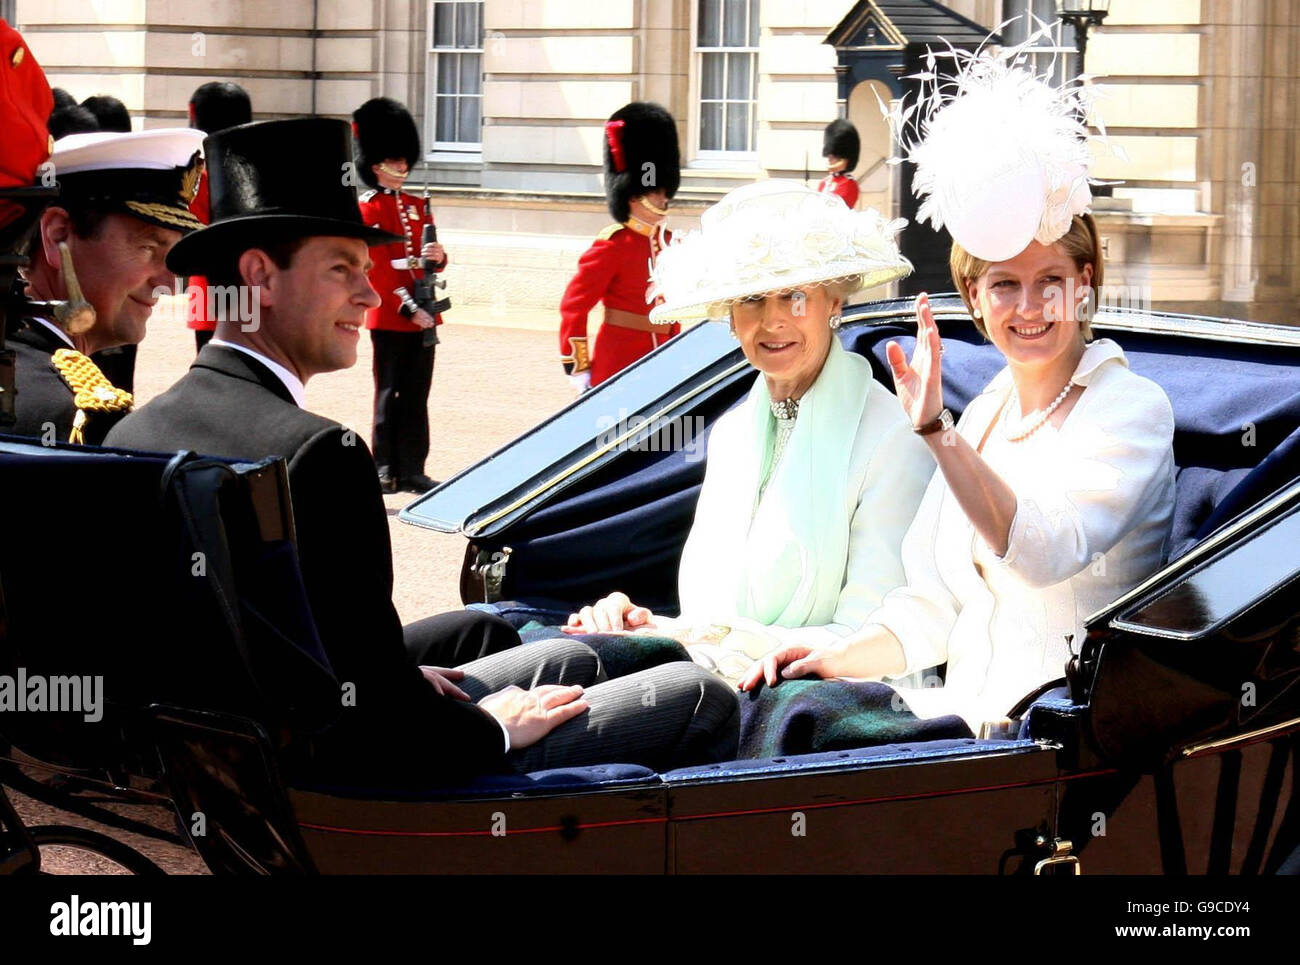 The Countess of Wessex joins Princess Alexandra, the Earl of Wessex and Rear Admiral Timothy Laurence as leave Buckingham Palace, London, to watch the annual Trooping the Colour ceremony as Britain' Queen Elizabeth II celebrates her official 80th birthday. PRESS ASSOCIATION Photo, Picture date: Saturday June 17, 2006. More than 1,100 soldiers will take part in the colourful annual display of pomp and pageantry. See PA story ROYAL Queen. Photo credit should read: Chris Young/WPA rota/PA. Stock Photo